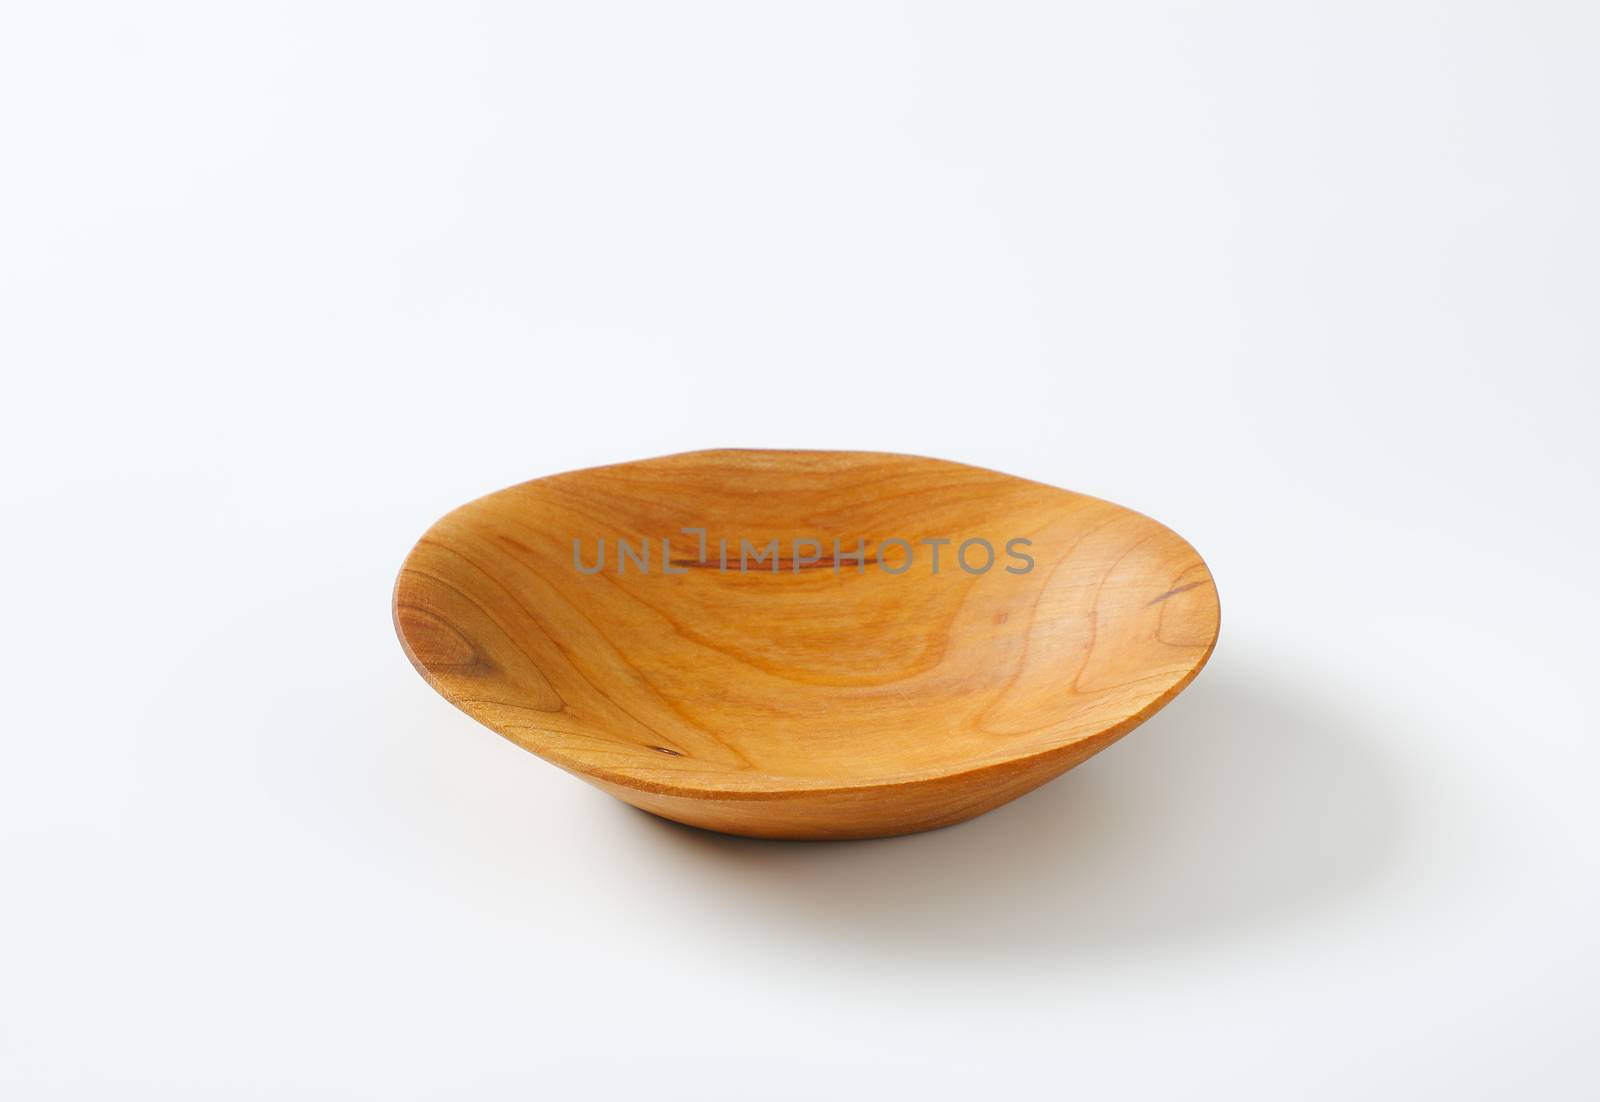 Hand carved wooden bowl by Digifoodstock